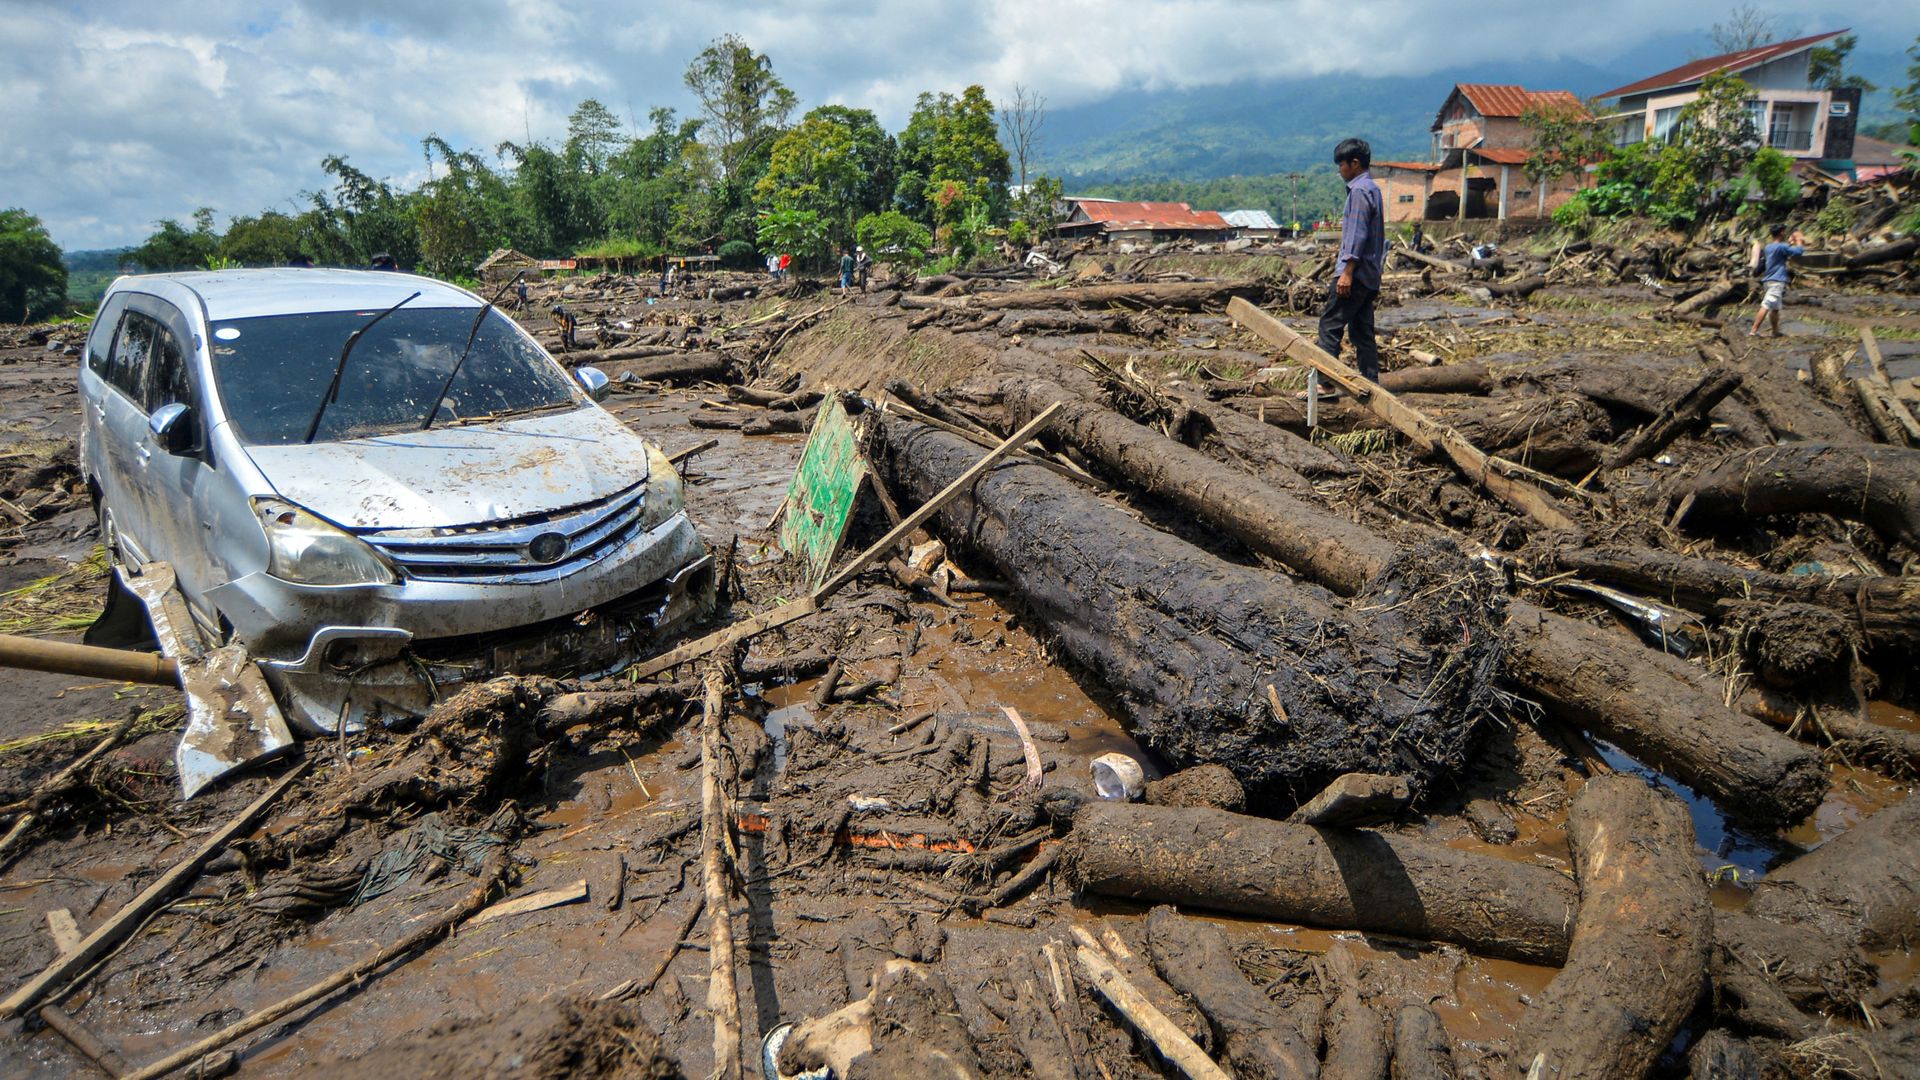 Cold lava and mud landslides leave more than 40 dead in Indonesia